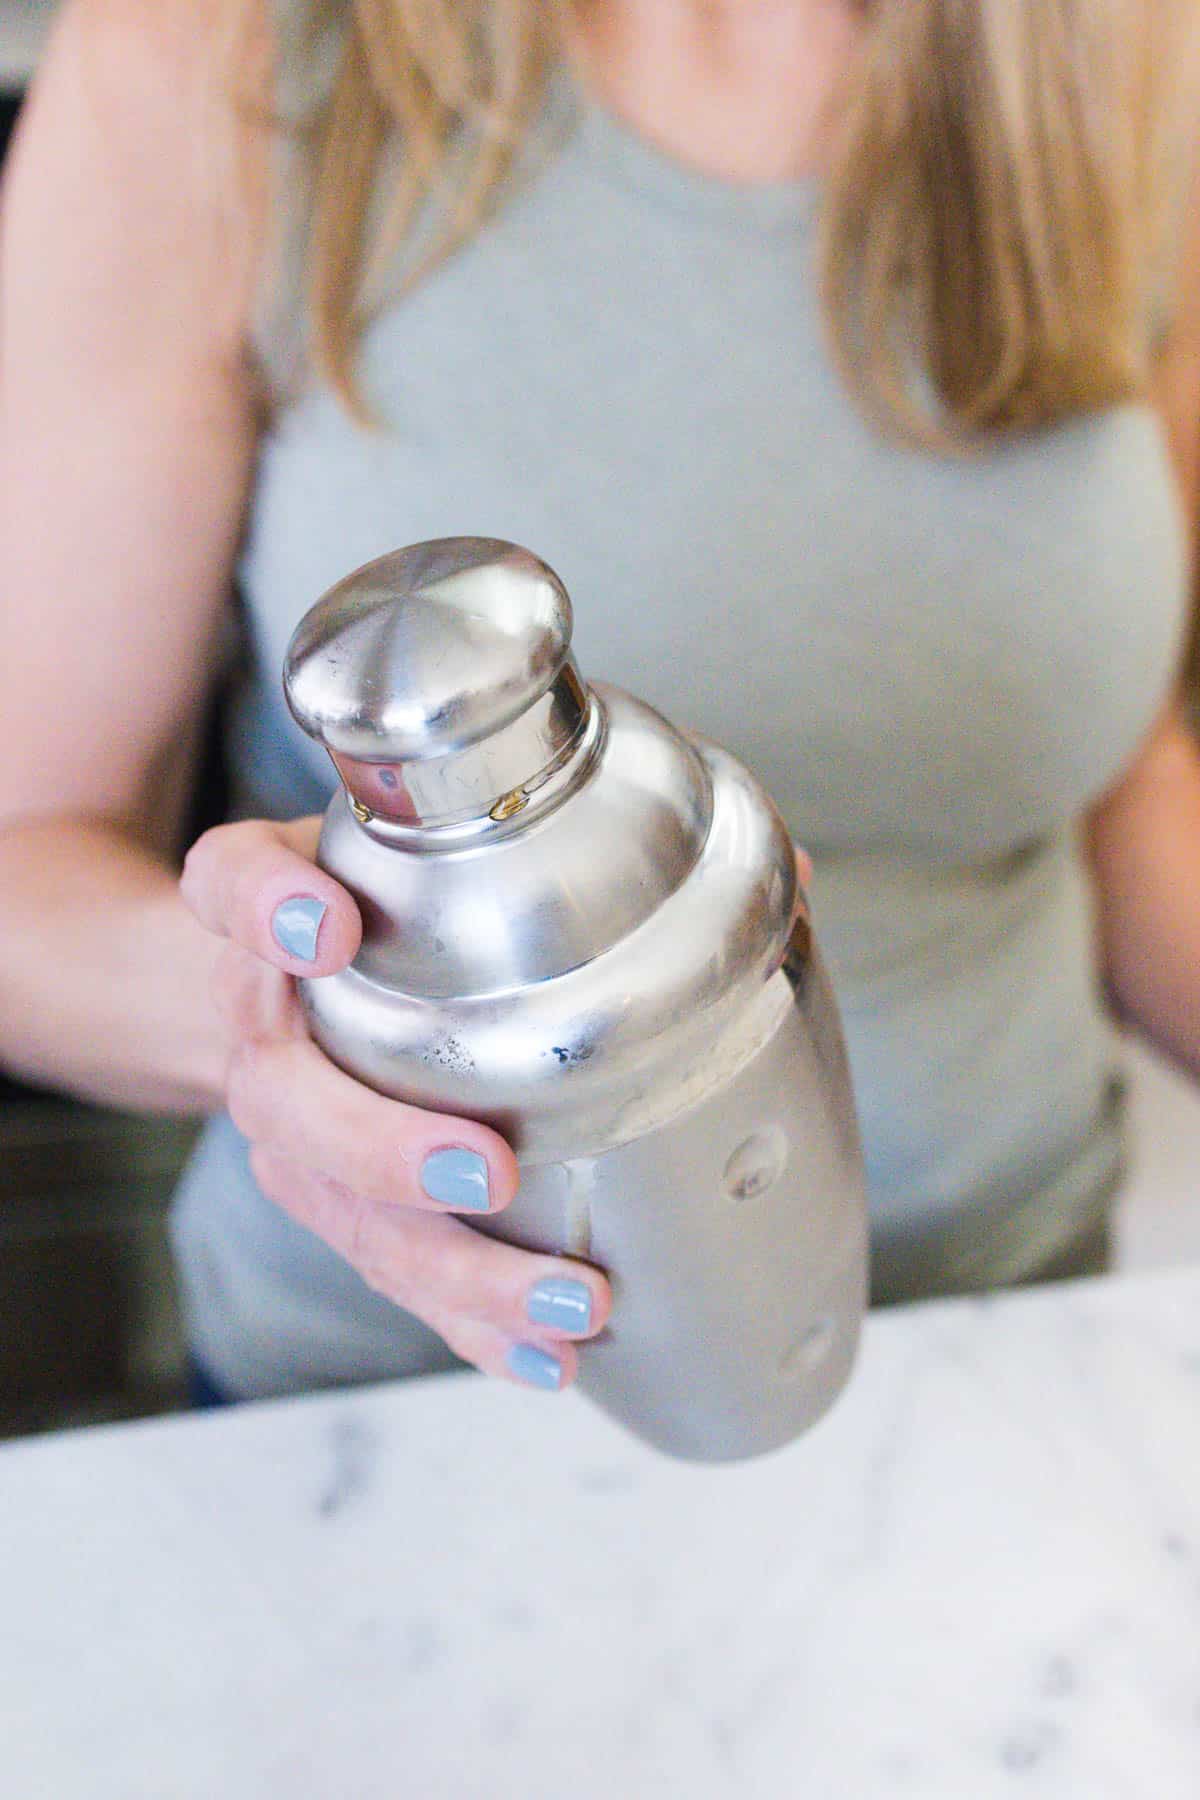 Woman shaking a silver cocktail shaker.